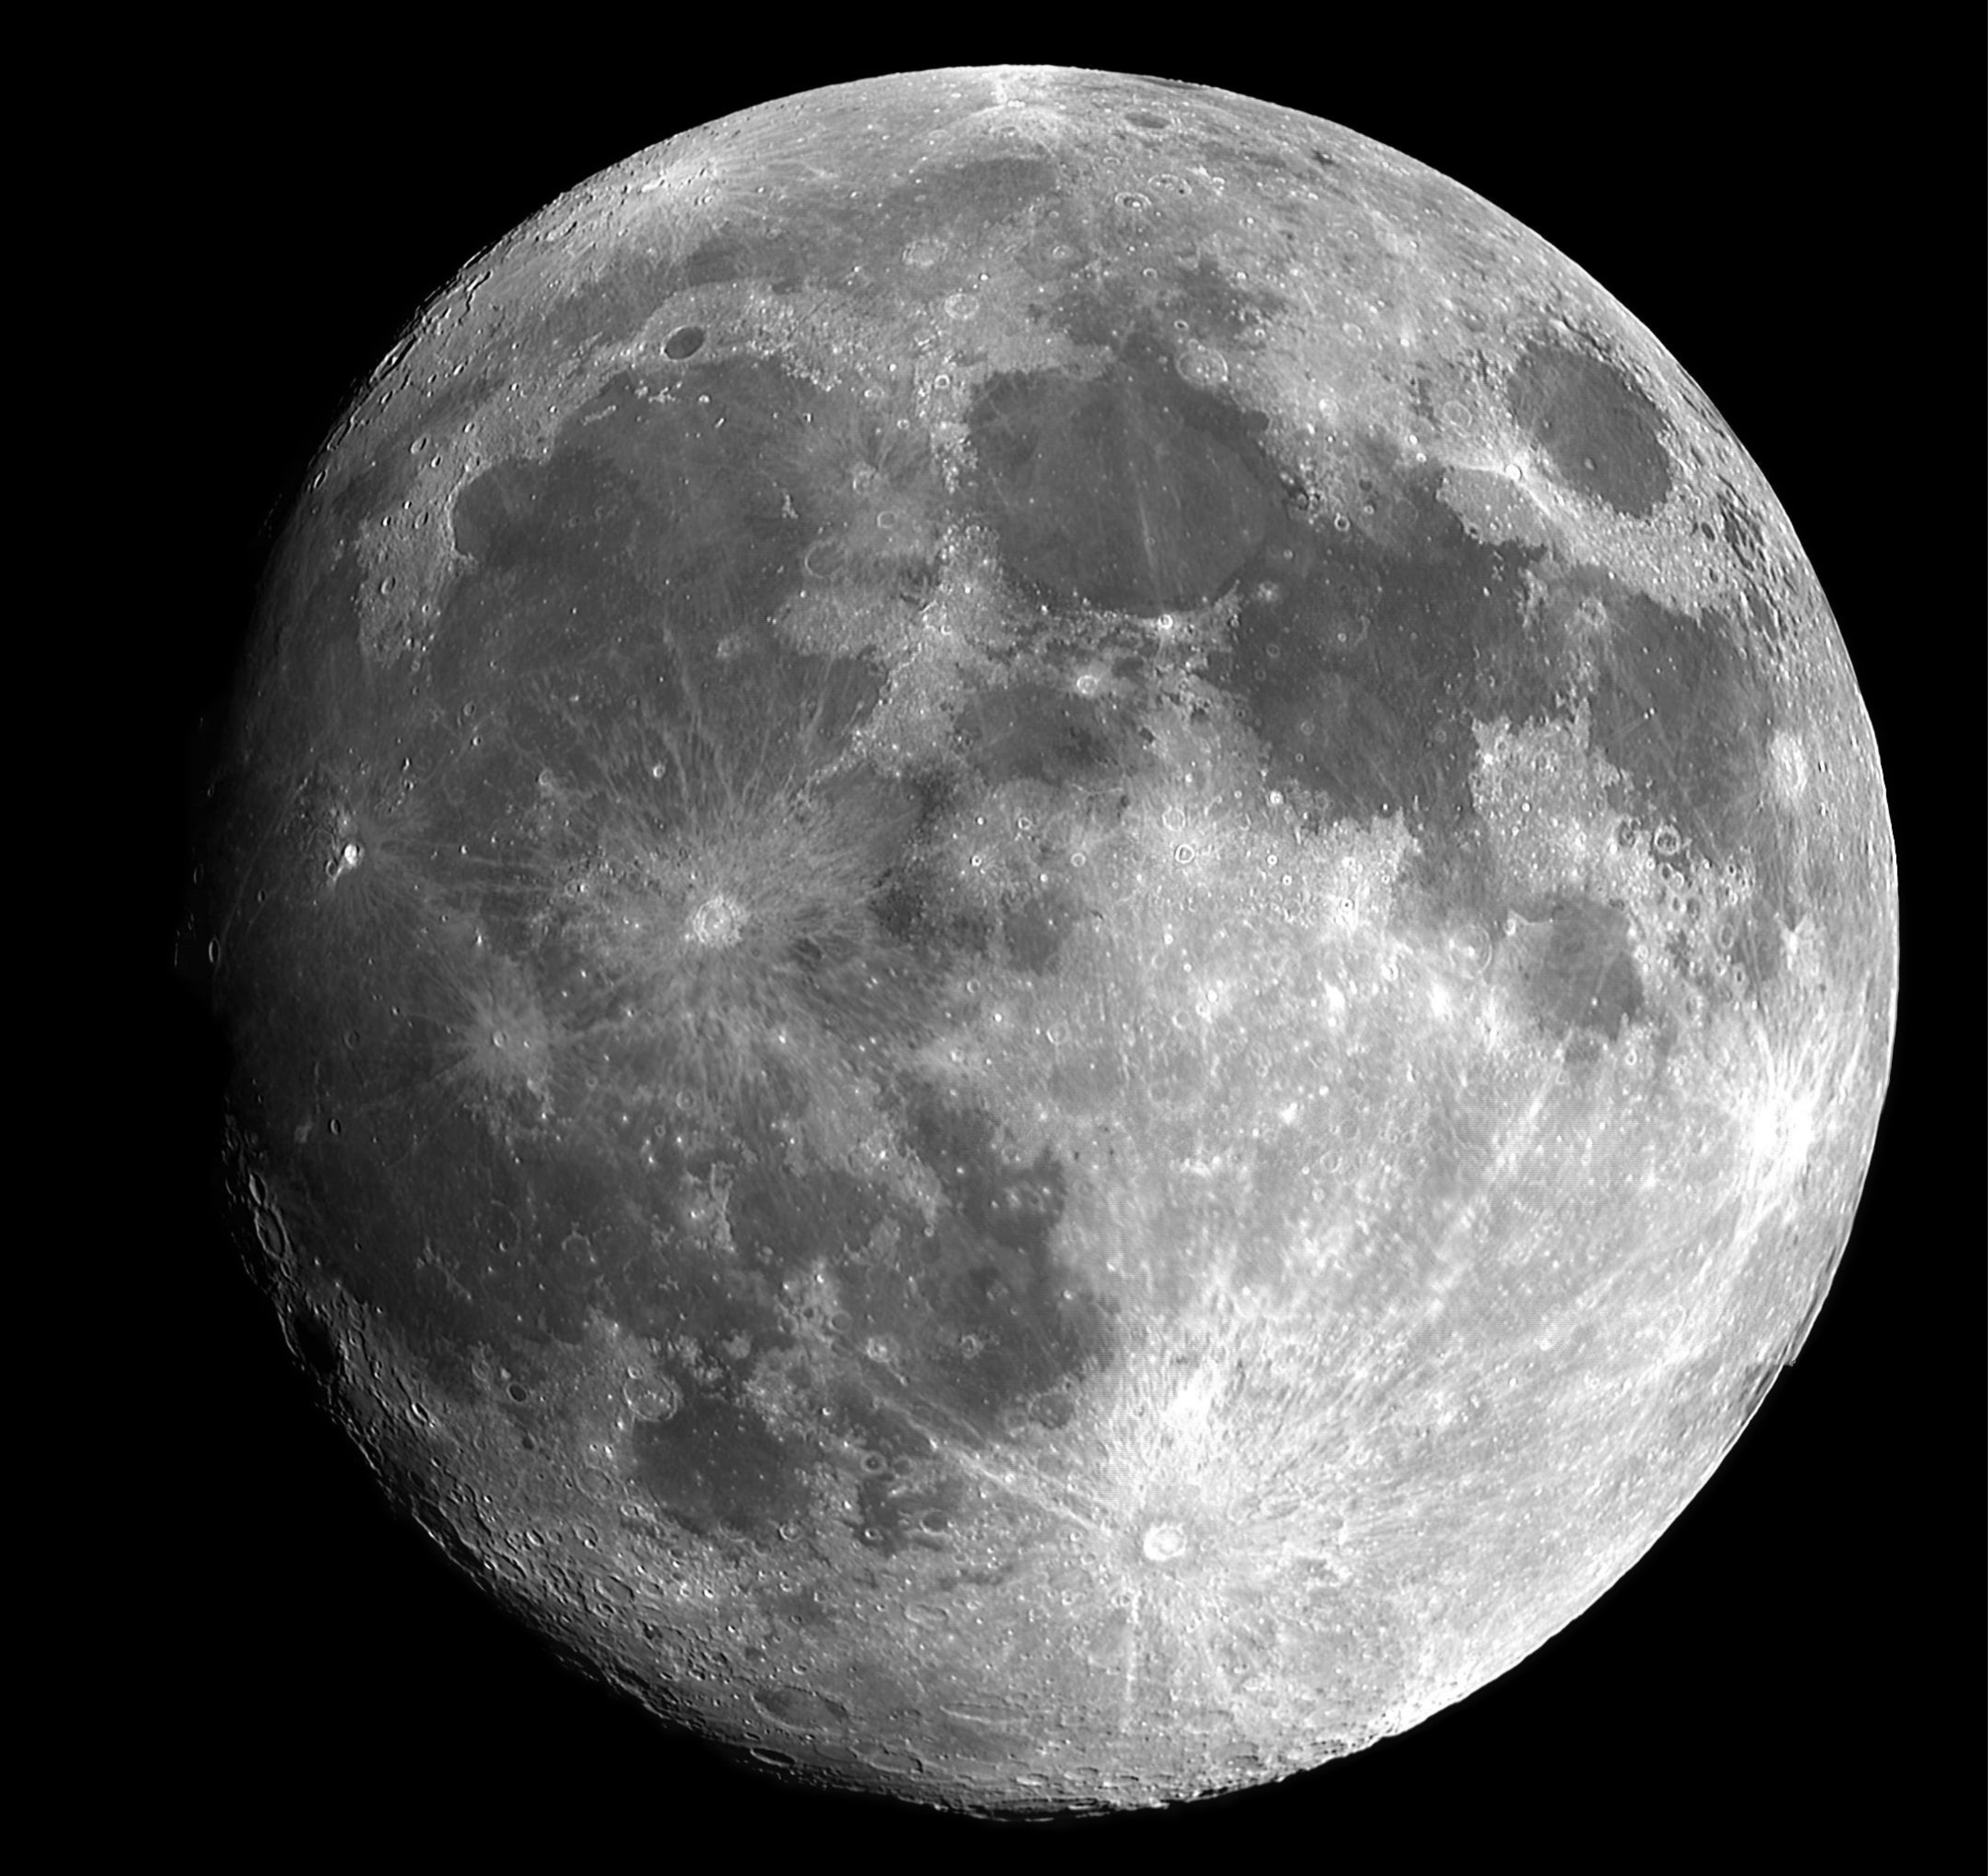 Fun facts about the Moon